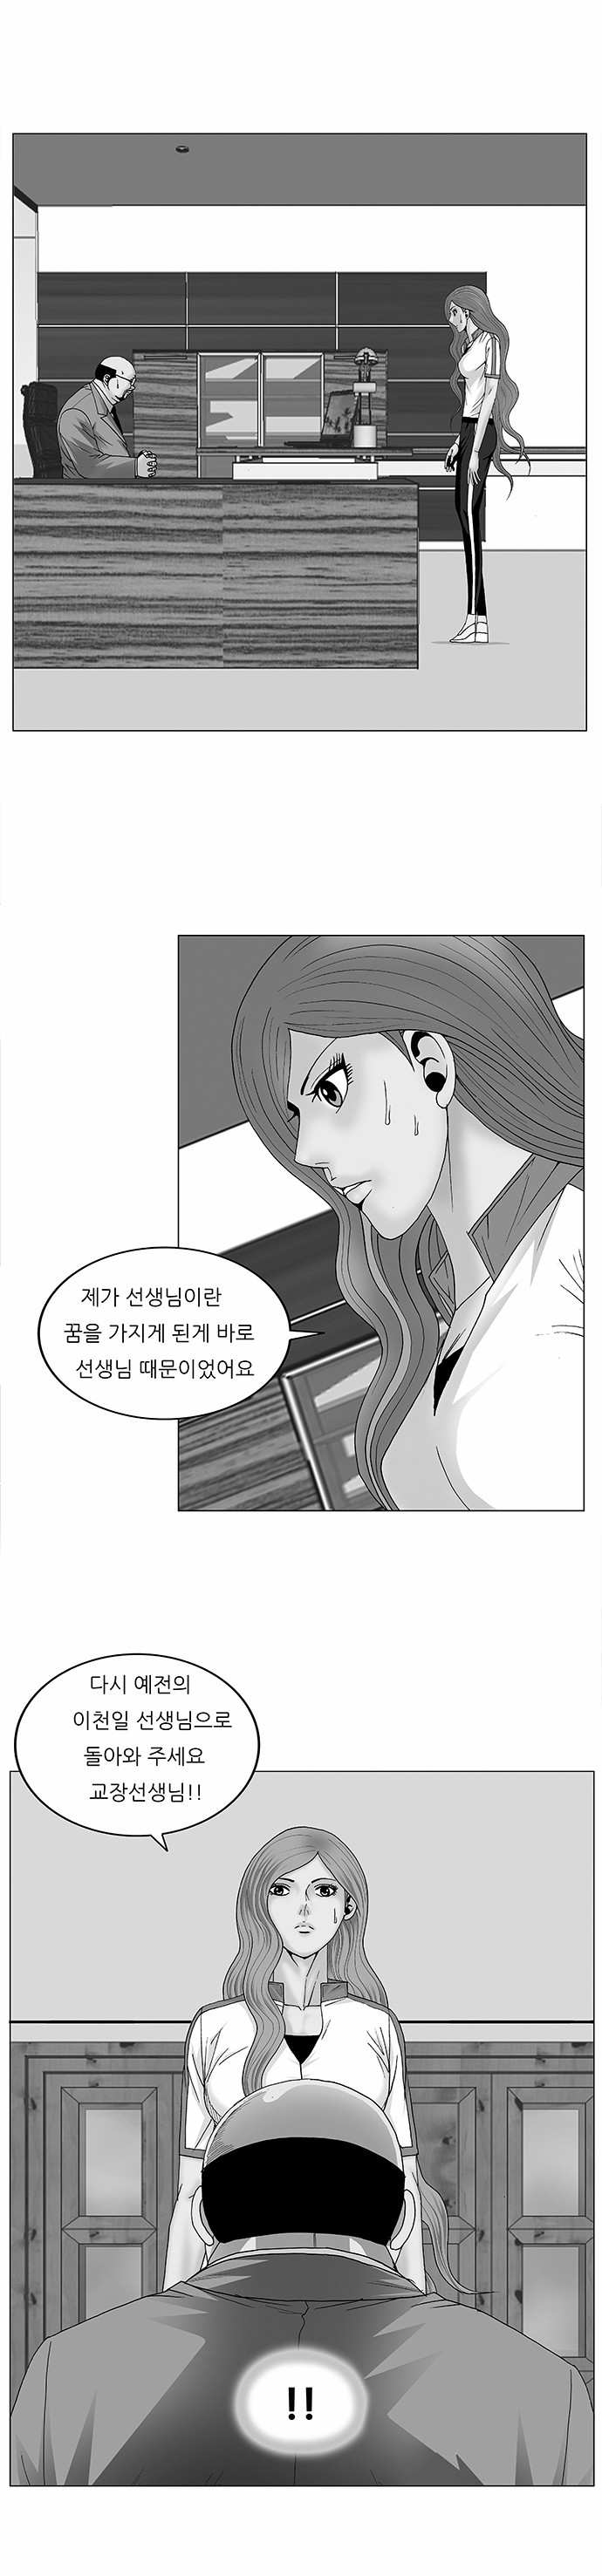 Ultimate Legend - Kang Hae Hyo - Chapter 91 - Page 1